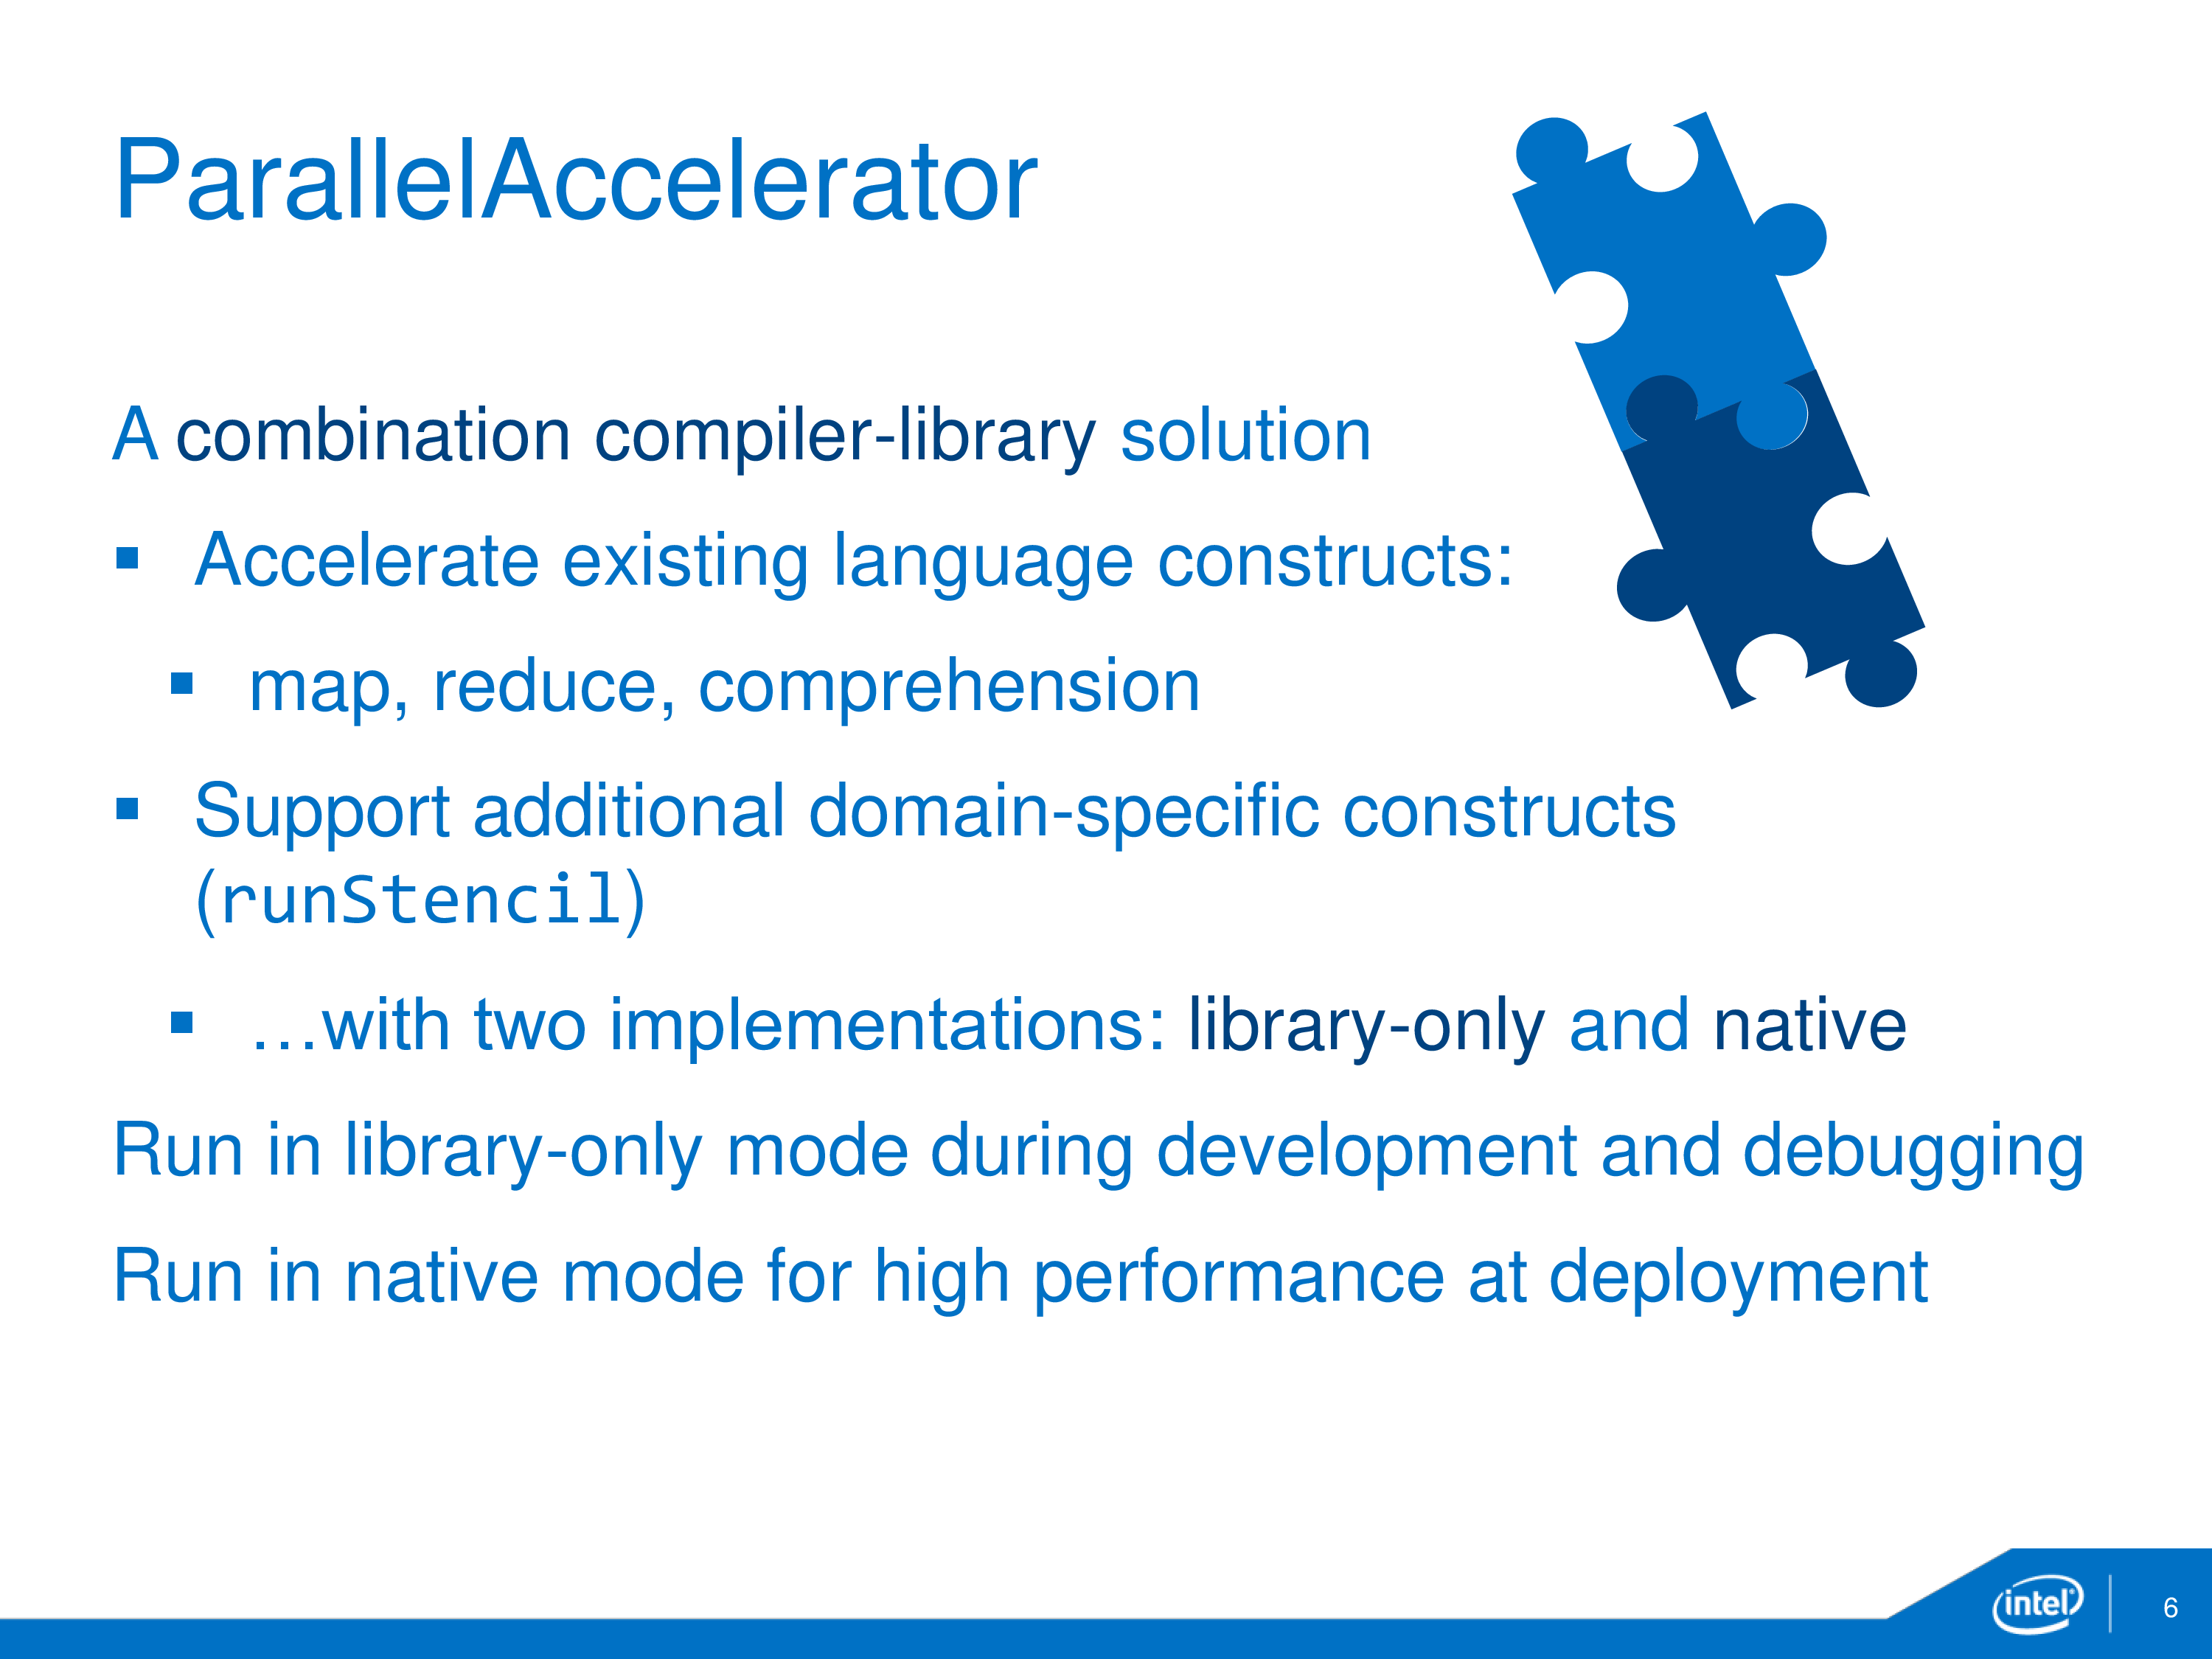 ParallelAccelerator: A combination compiler-library solution. Accelerate existing language constructs: map, reduce, comprehension. Support additional domain-specific constructs (runStencil) ...with two implementations: library-only and native. Run in library-only mode during development and debugging. Run in native mode for high performance at deployment.